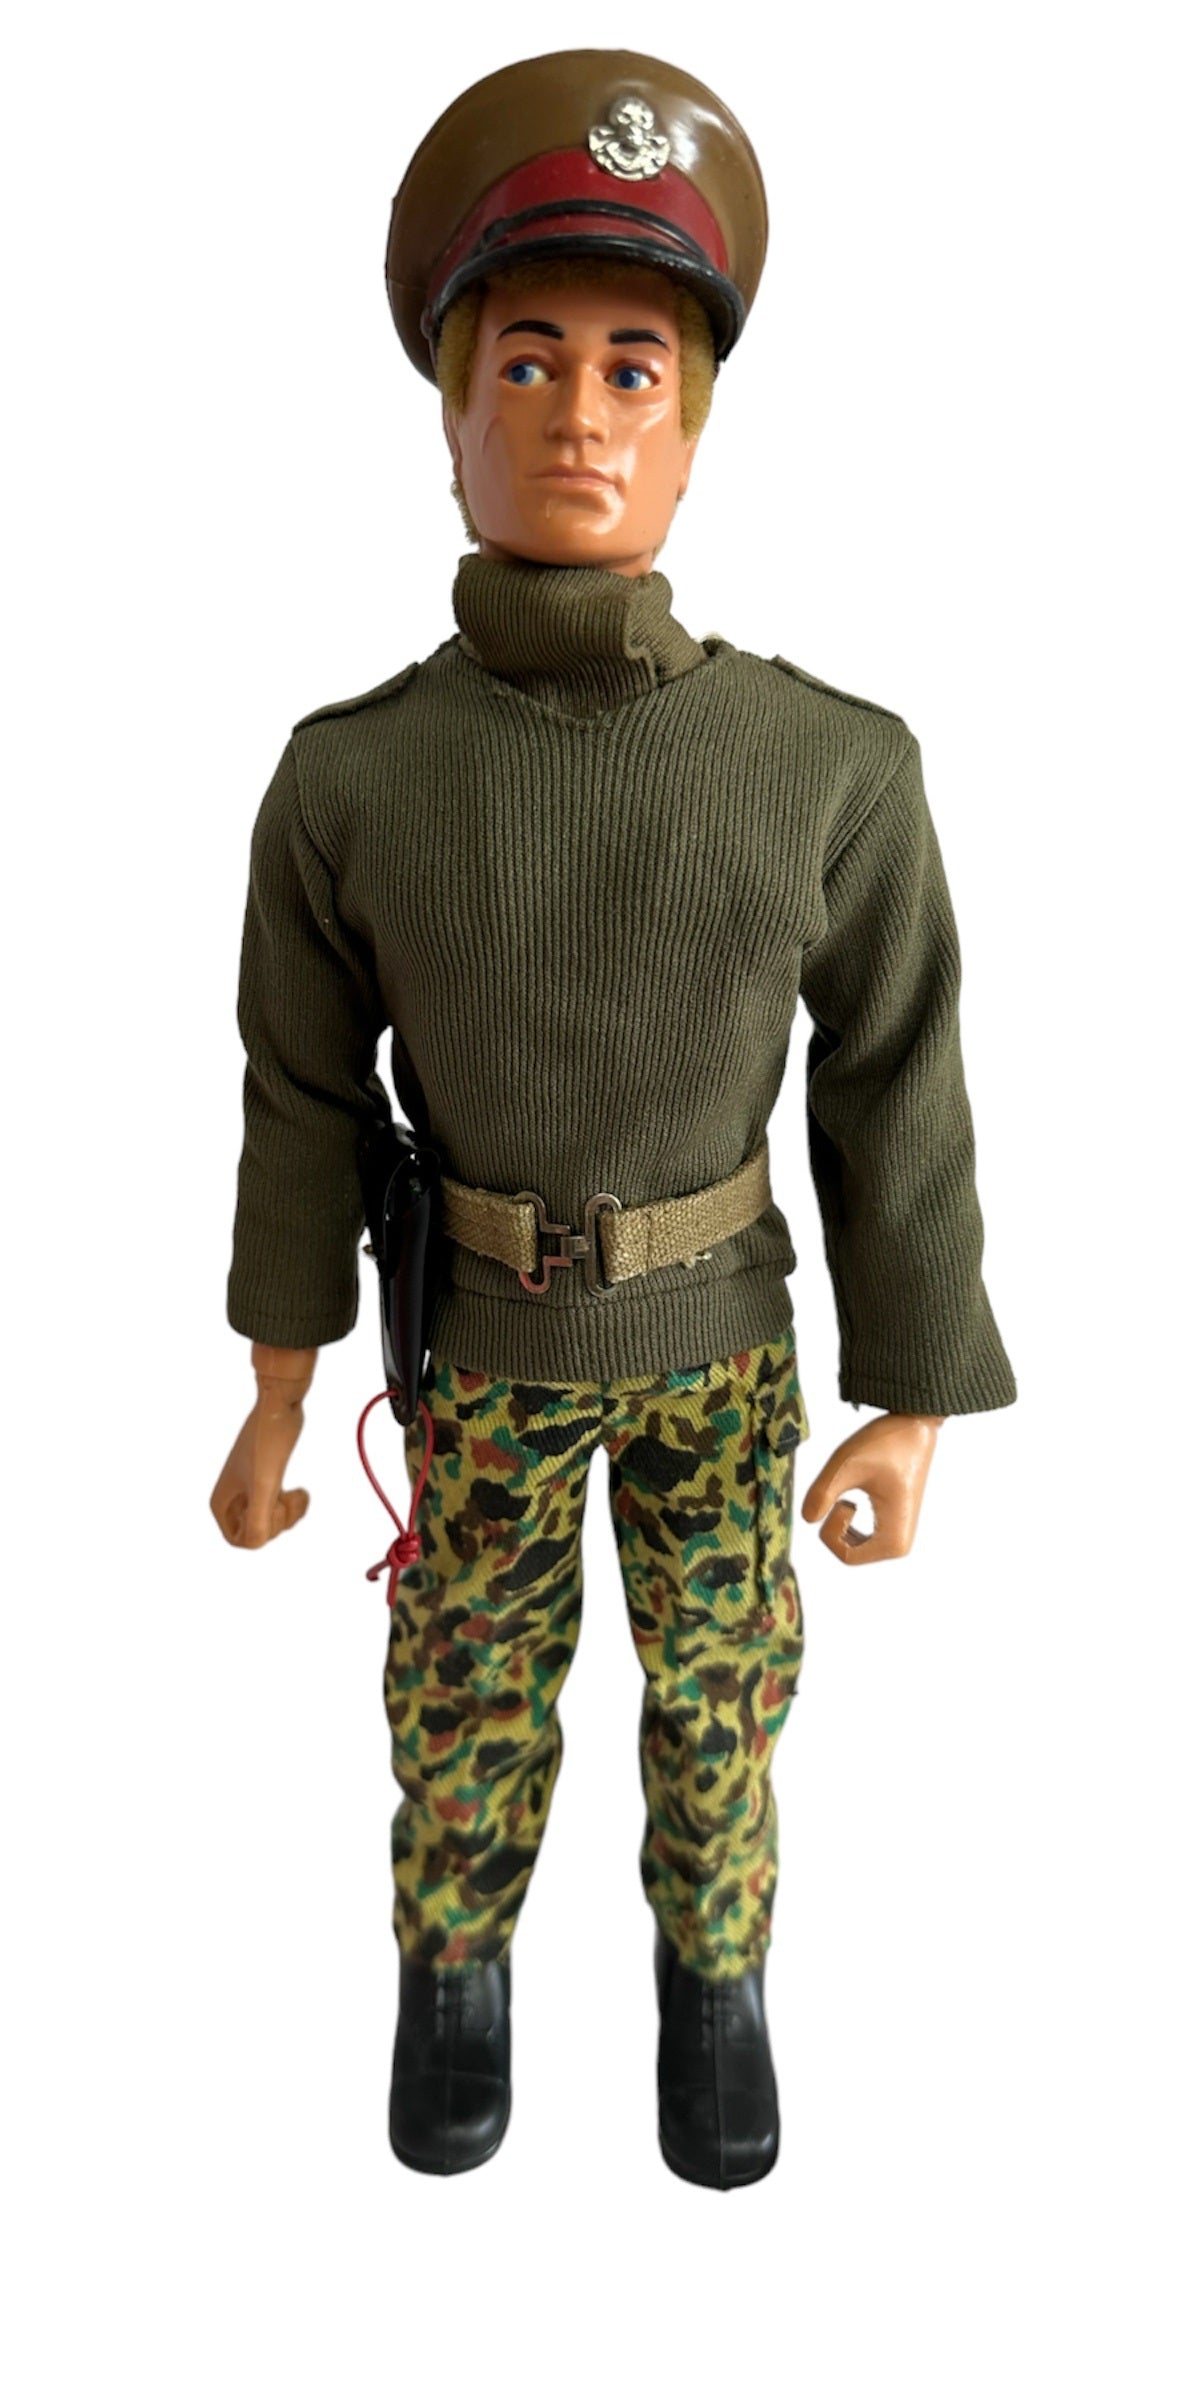 Vintage 1975 Action Man - Talking Commander - The Leader Of The Action Man Team - 12 Inch Blue Pants Action Figure With Realistic Blonde Hair, Eagle Eyes And Gripping Hands -  In A Reproduction Box